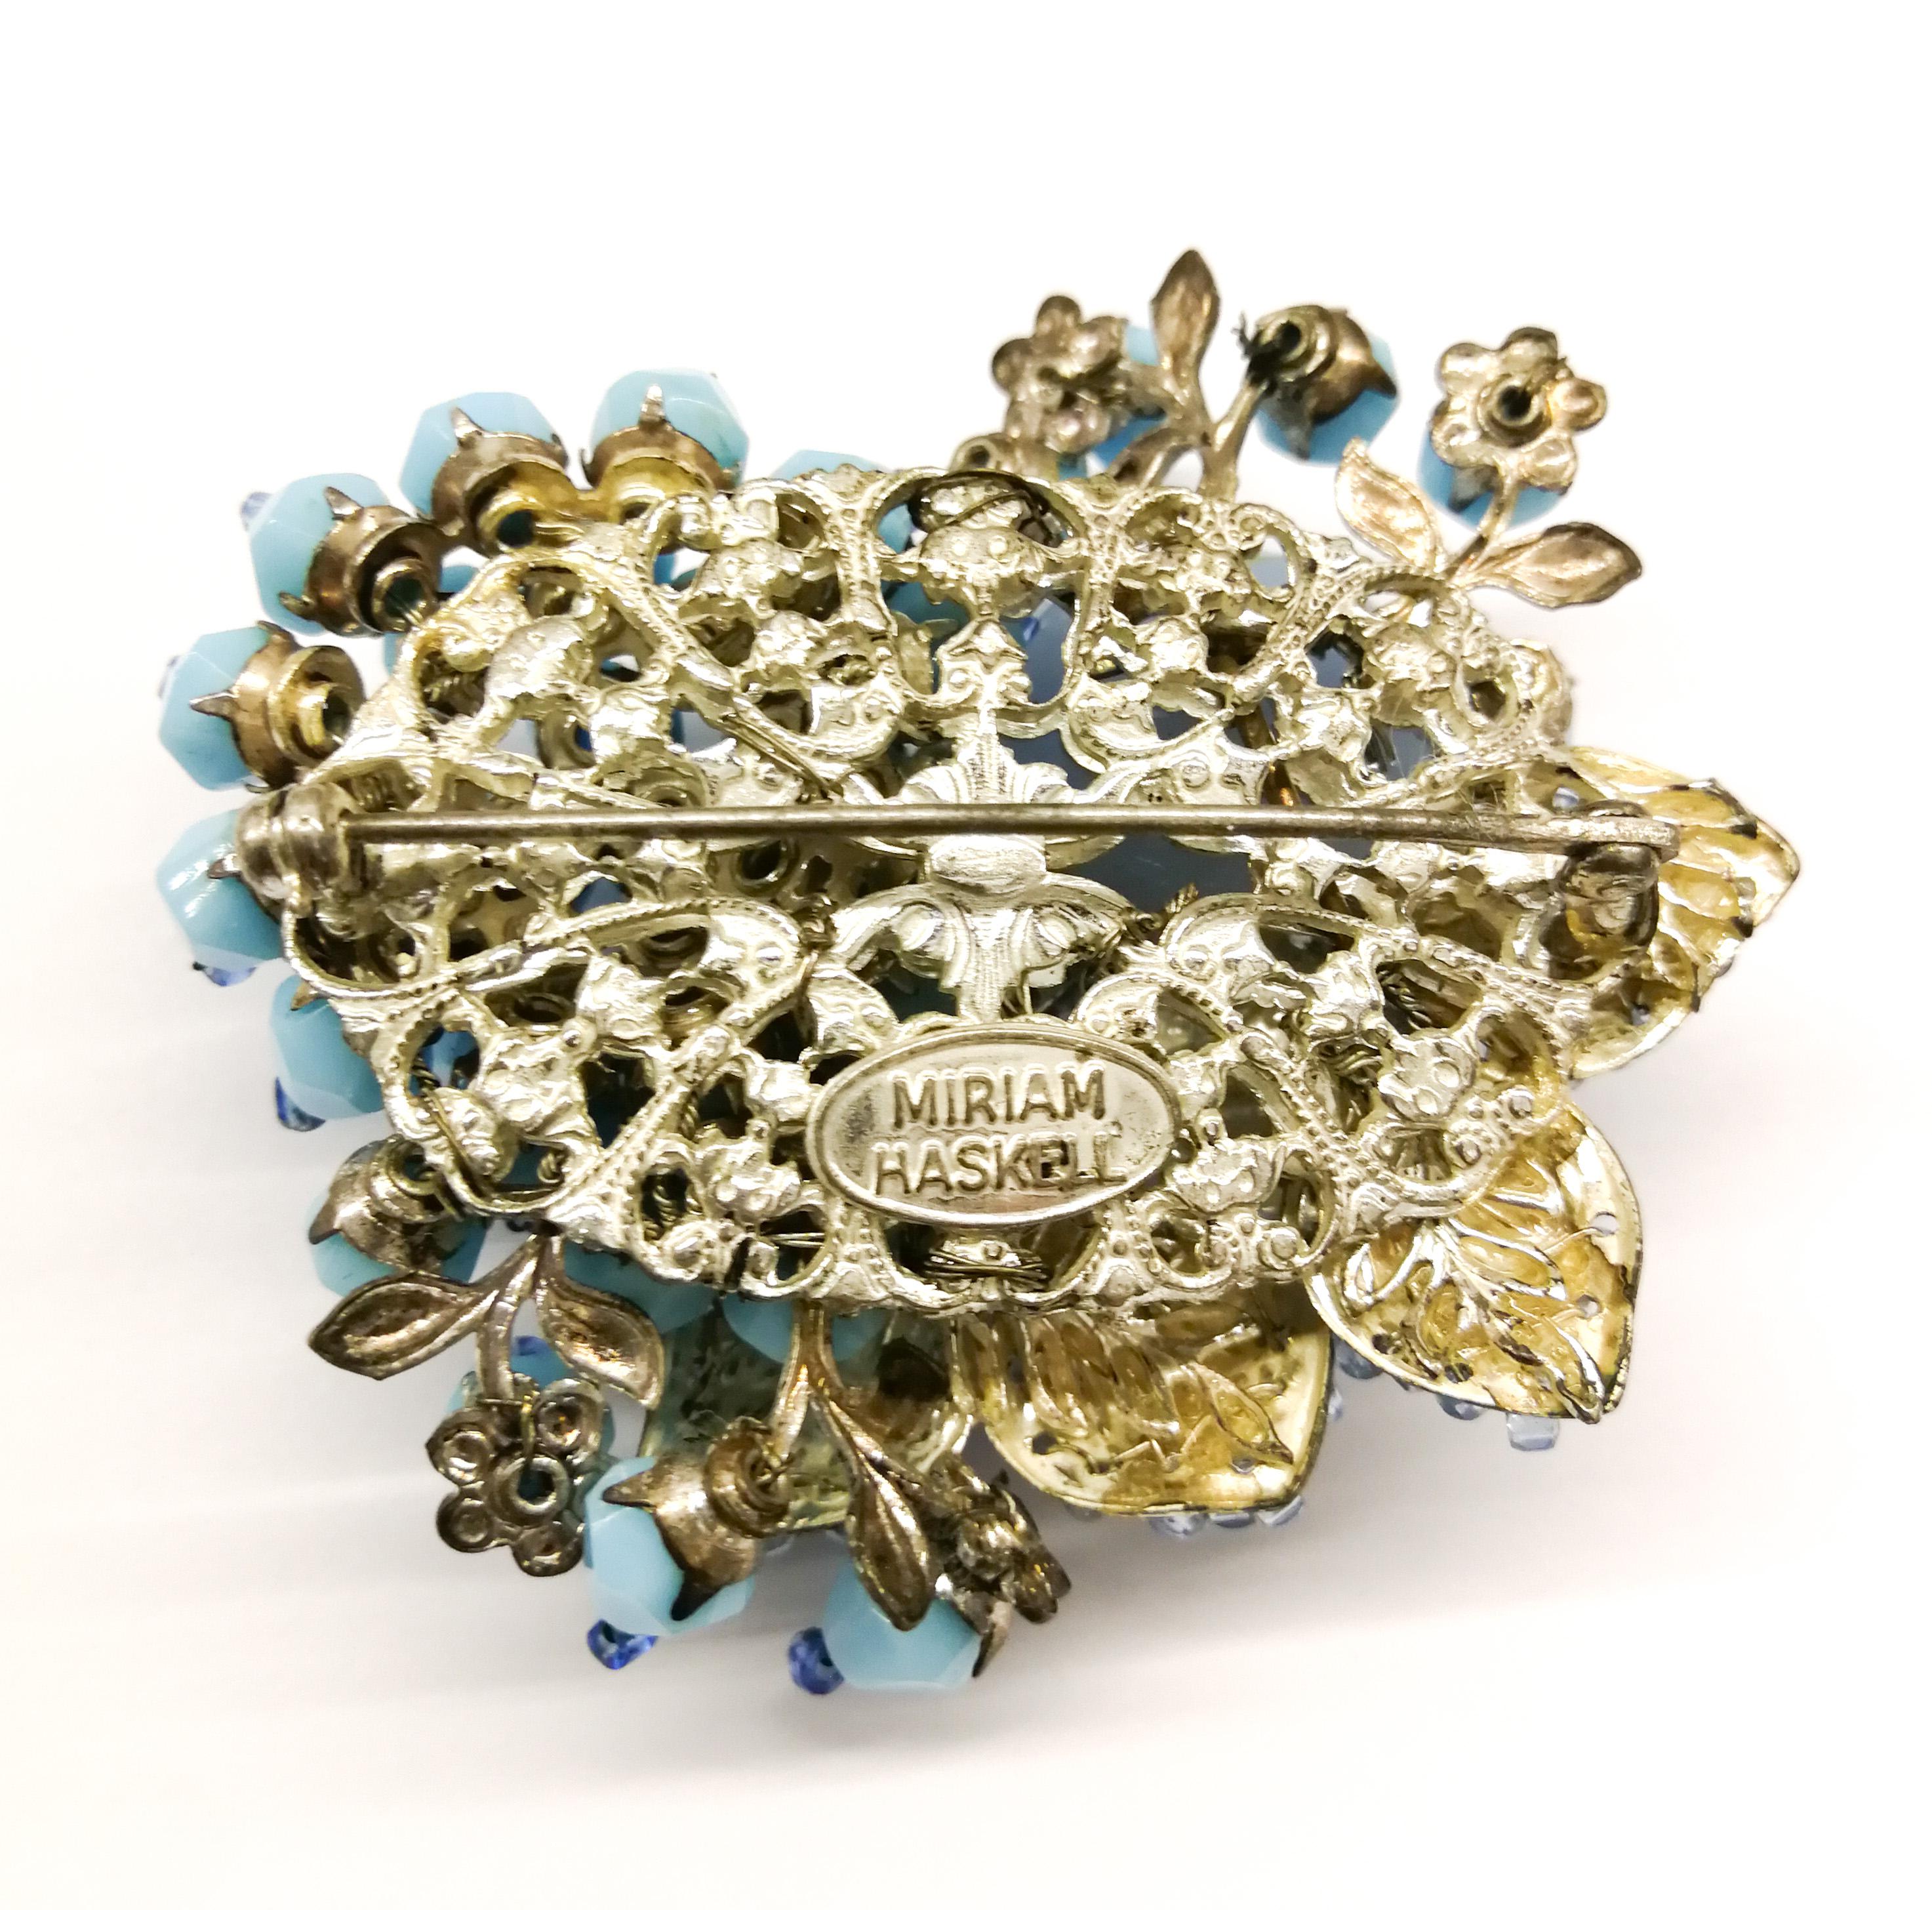 Women's or Men's A large blue glass and paste 'floral' brooch, Miriam Haskell, 1960s